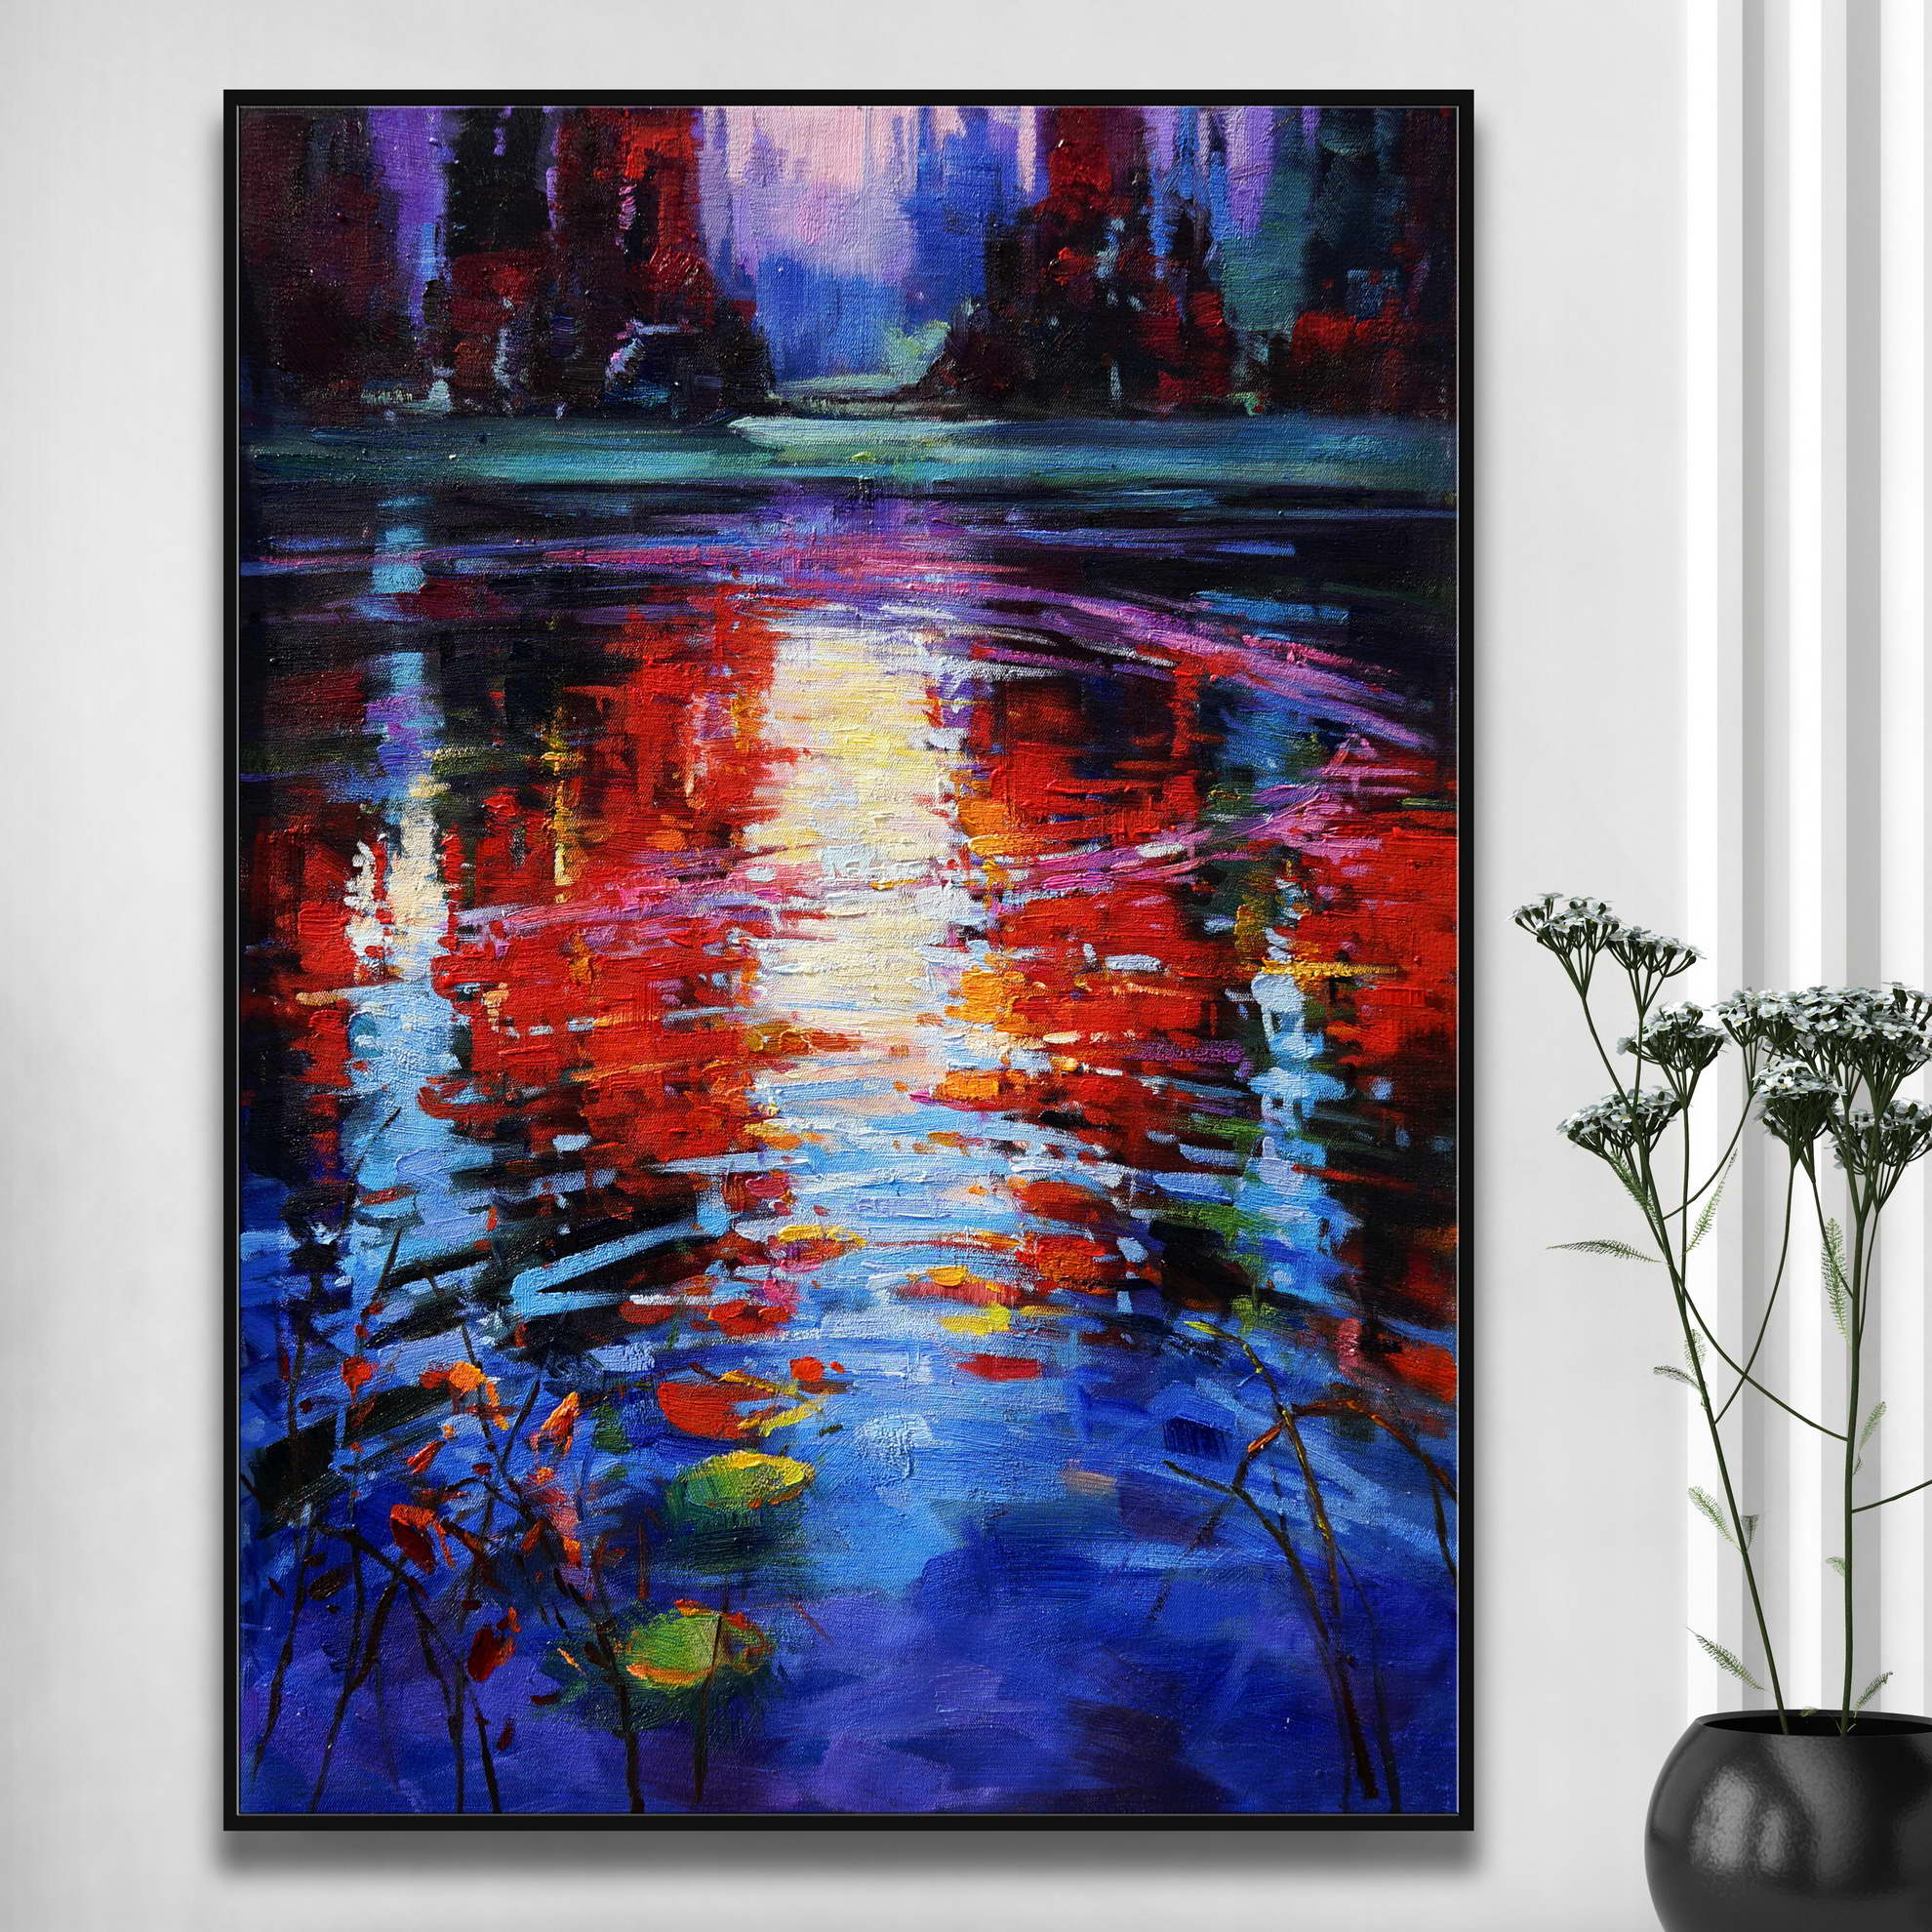 Hand painted Reflections at Sunset in the Swamp 60x80cm